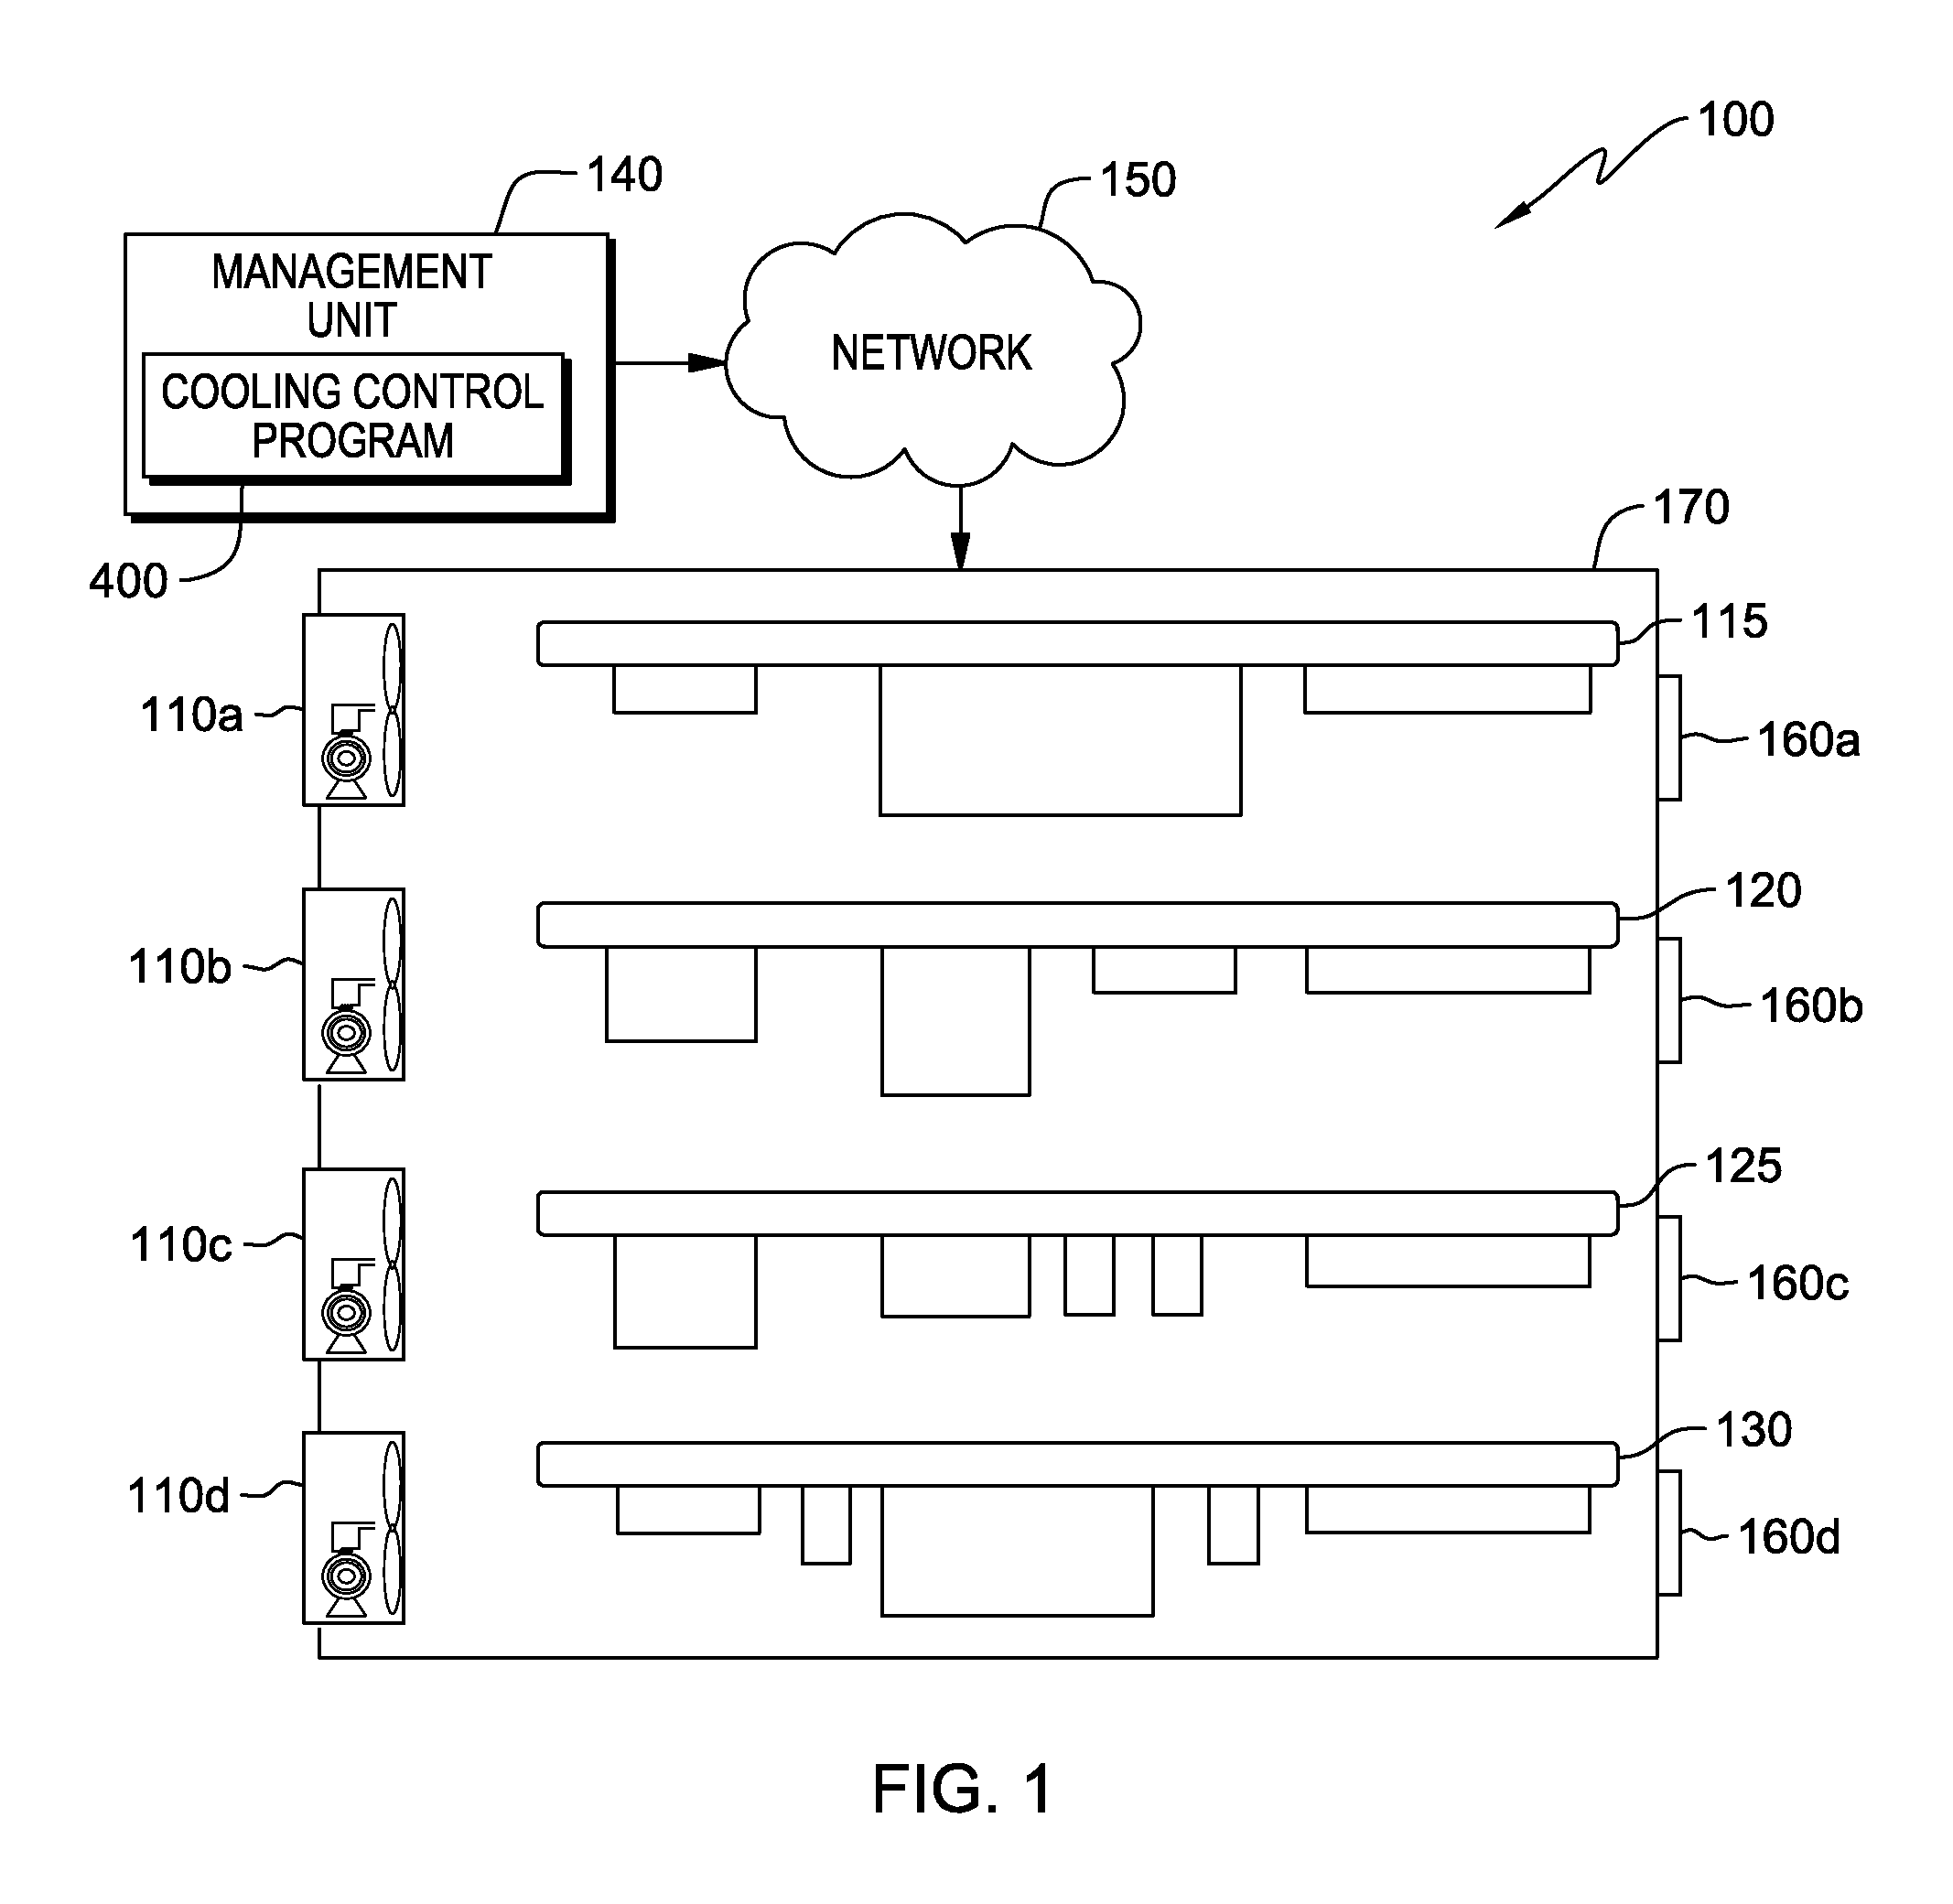 Air flow detection and correction based on air flow impedance